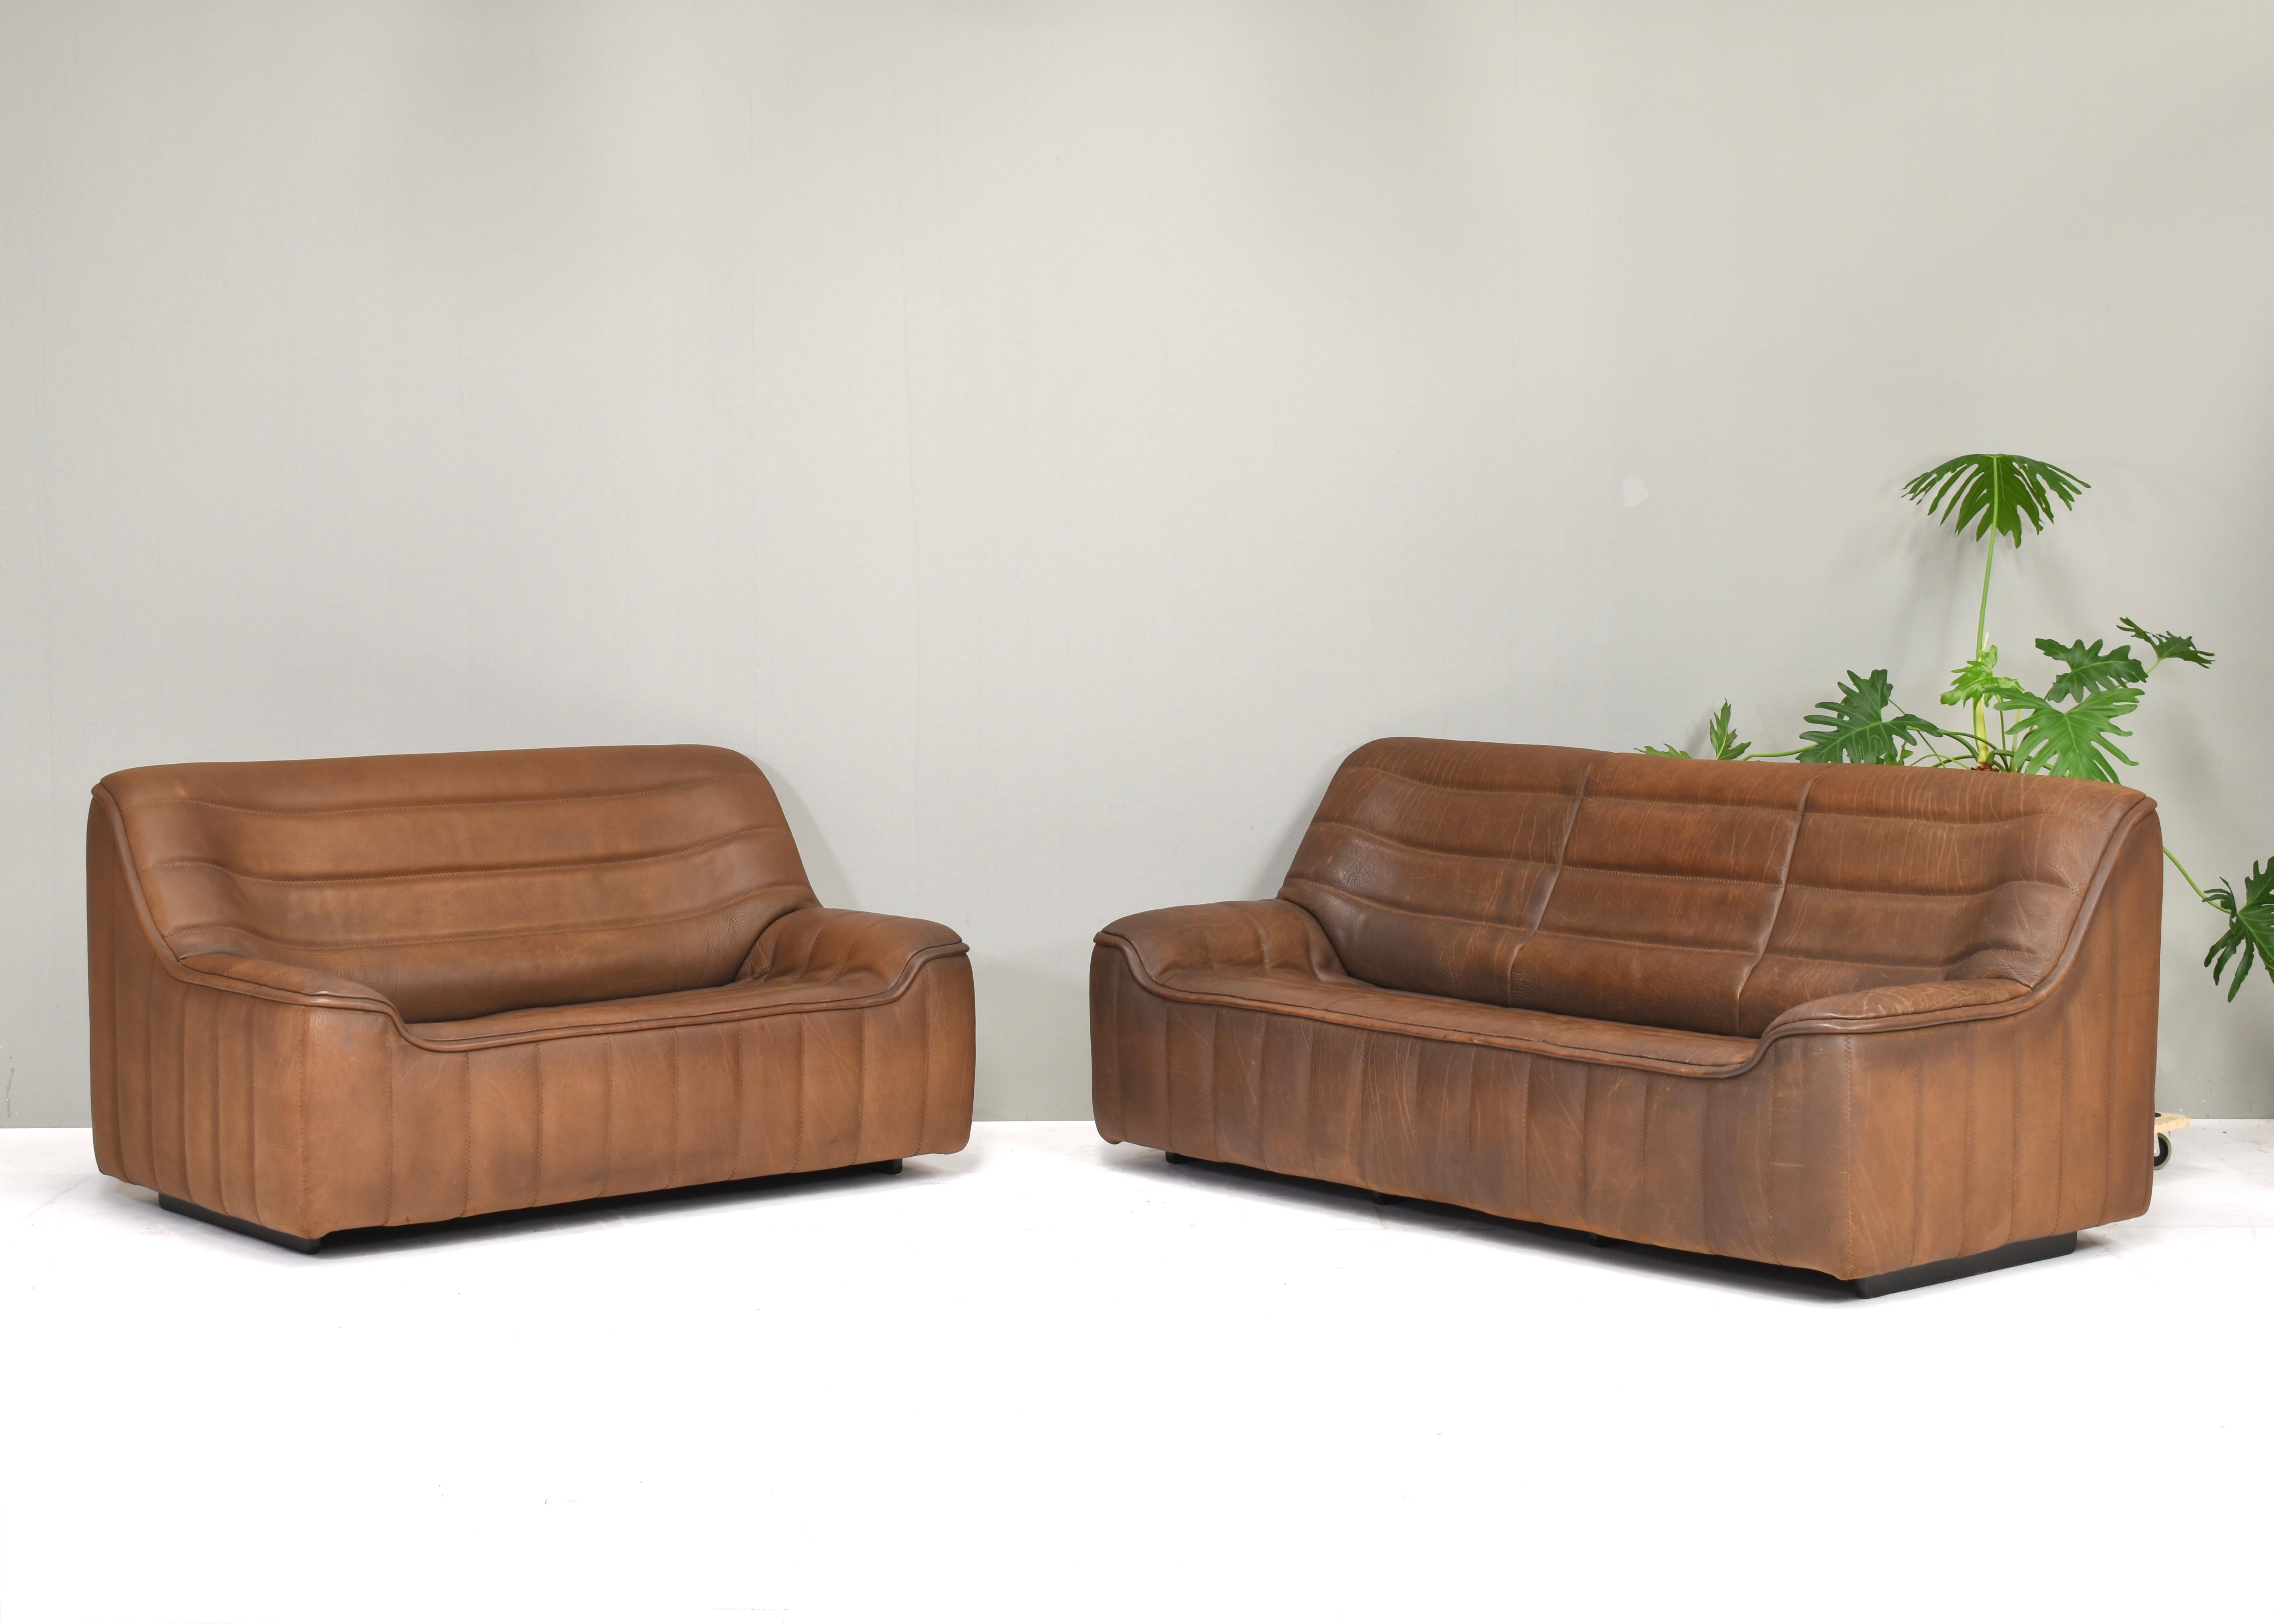 Rare model: Introducing the De Sede DS84 three and two seat sofa in Buffalo leather - Switzerland, 1970's – Where Luxury Meets Comfort

Also available with coffee table.

Designer: De Sede design team
Manufacturer: De Sede
Model: DS-84 three seat